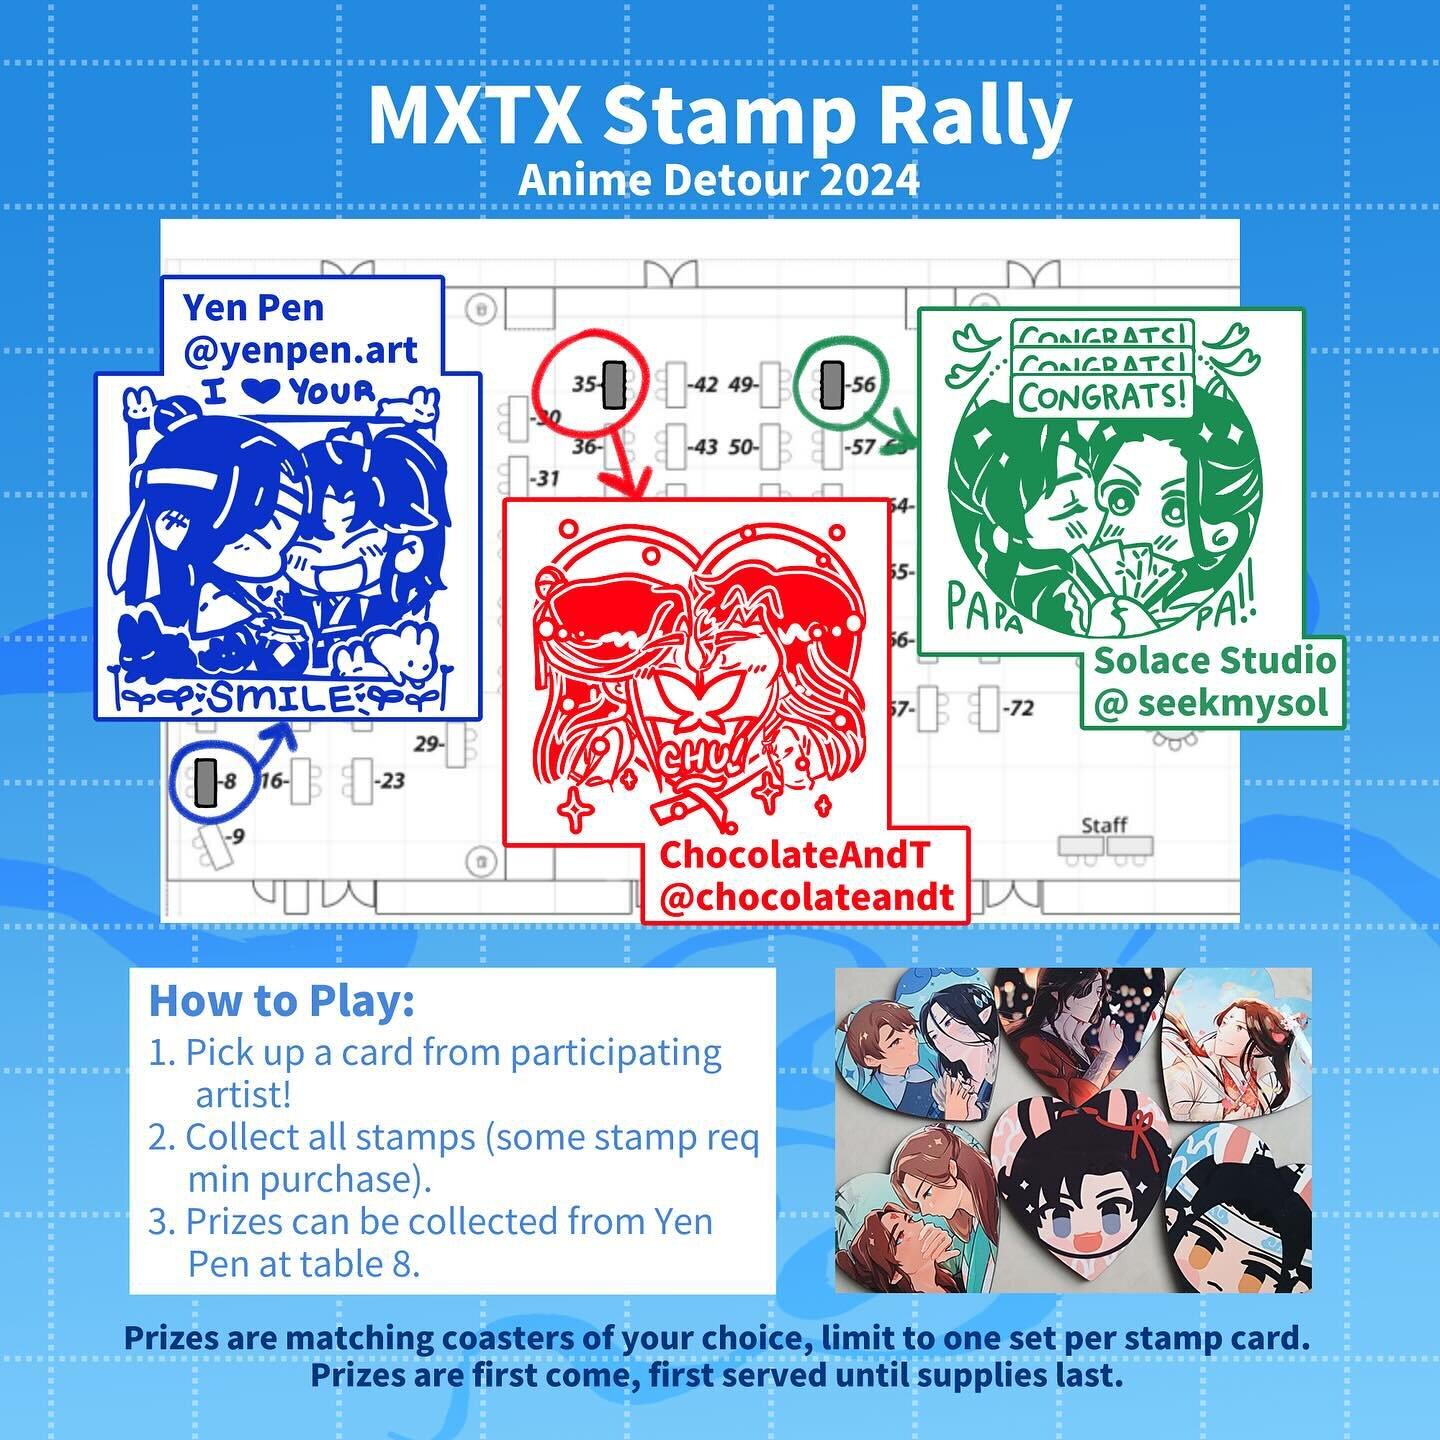 Surprise! It&rsquo;s another stamp rally for Anime Detour 2024! ❤️ If you want more than one set of couple coasters, you&rsquo;ll have to fill out multiple stamp cards while supplies last! I was in charge of SV so you get a lovely set of both couples